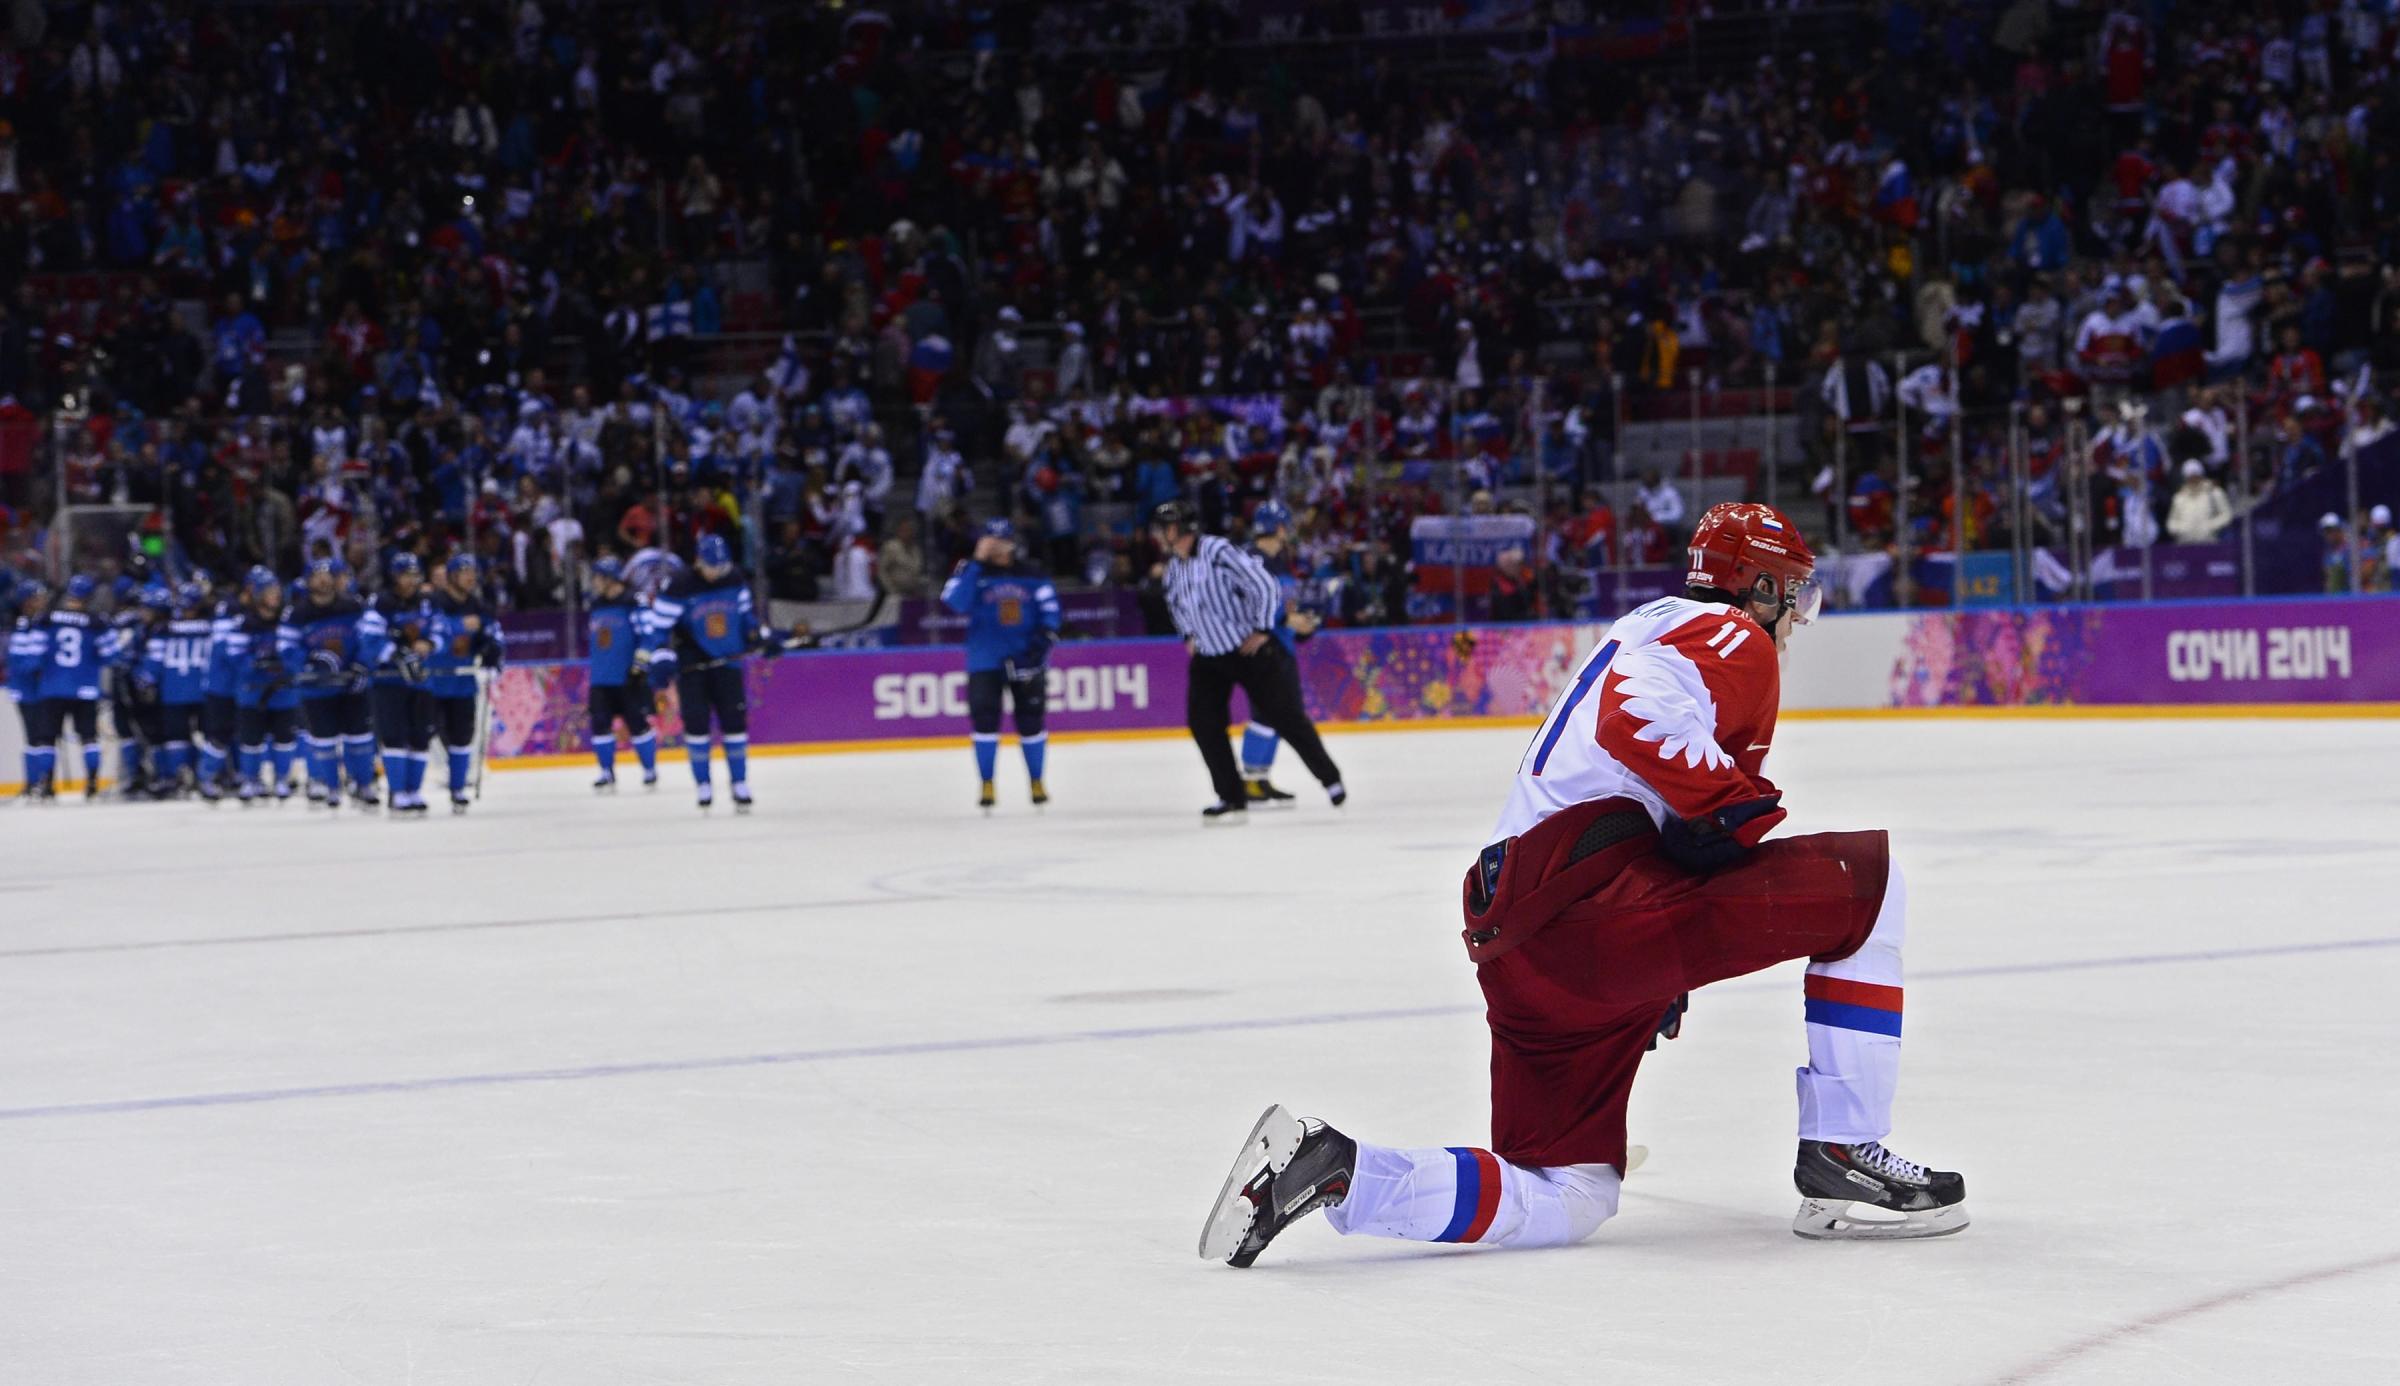 Yevgeni Malkin of Russia kneels on the ice after losing to Finland in the quarter final match between Finland and Russia.